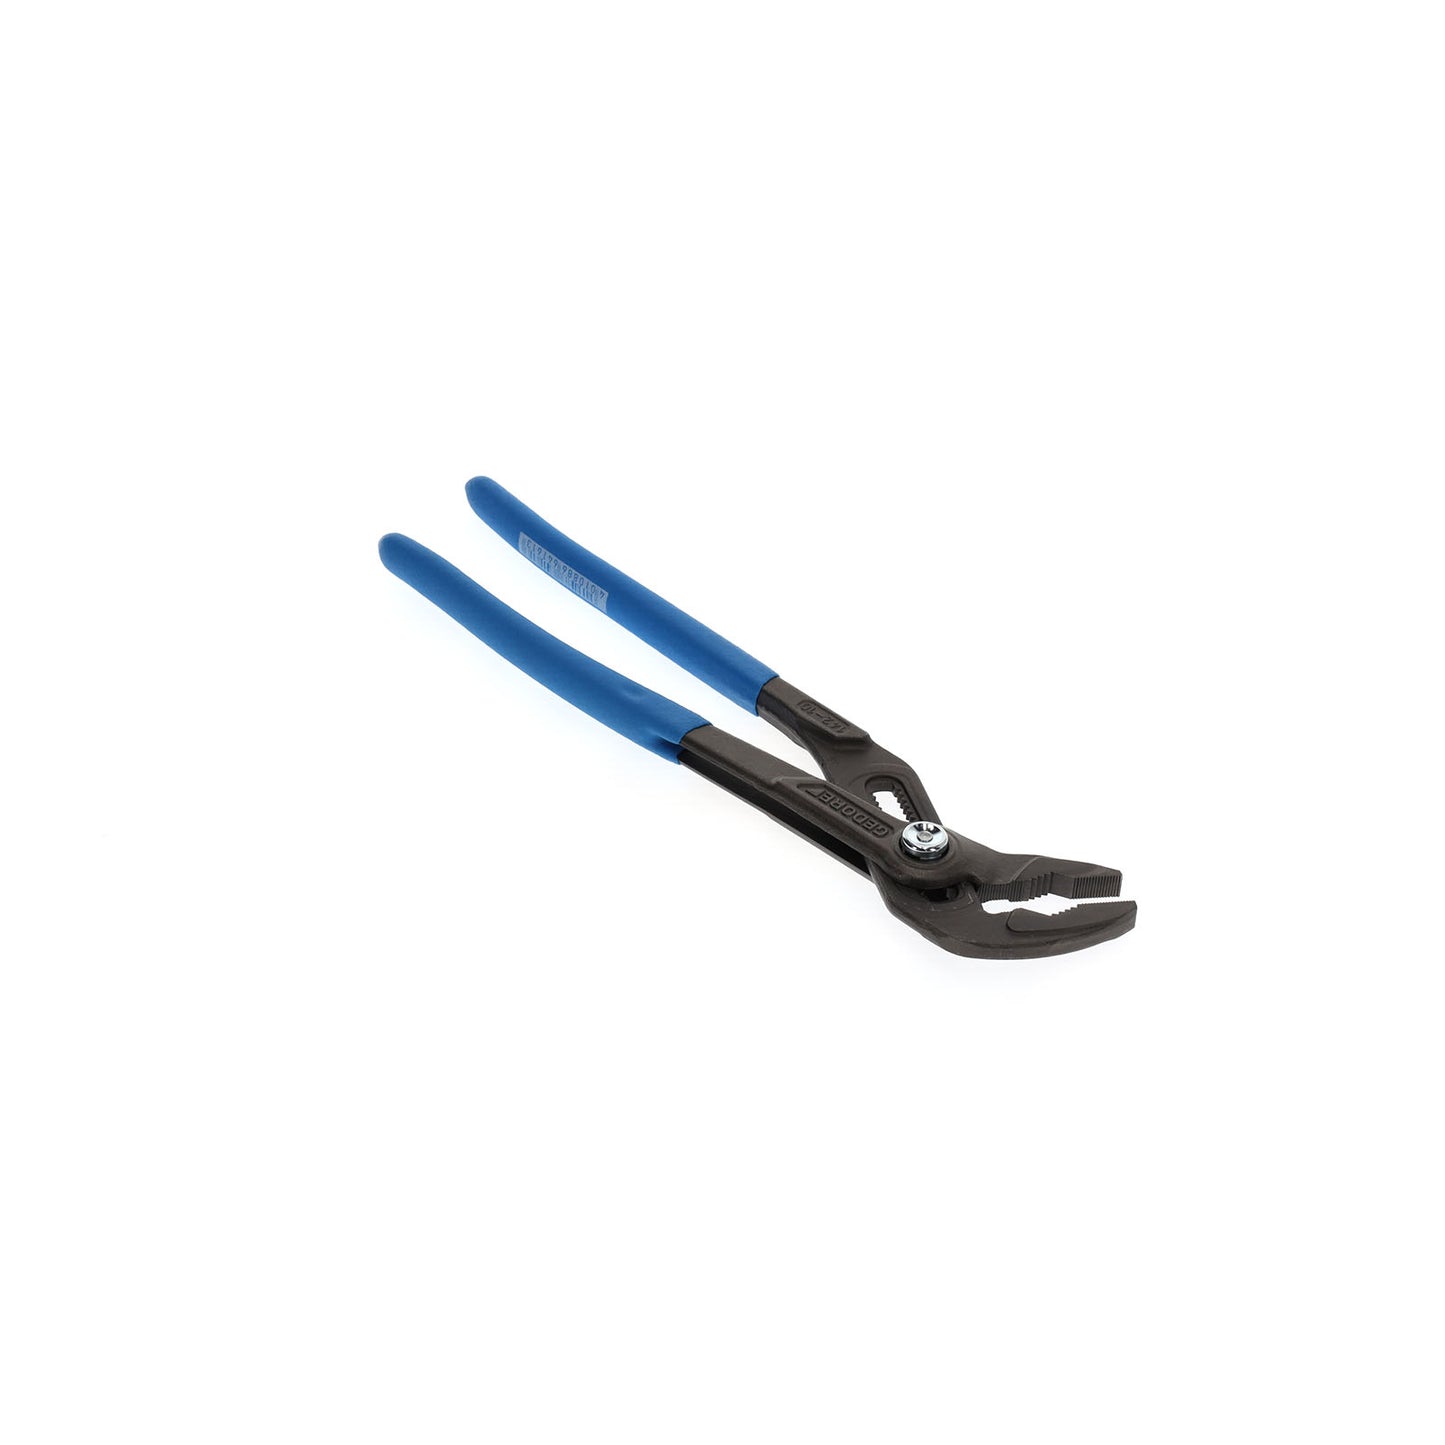 GEDORE 142 10 TL - Universal Pliers 250mm (6416180)